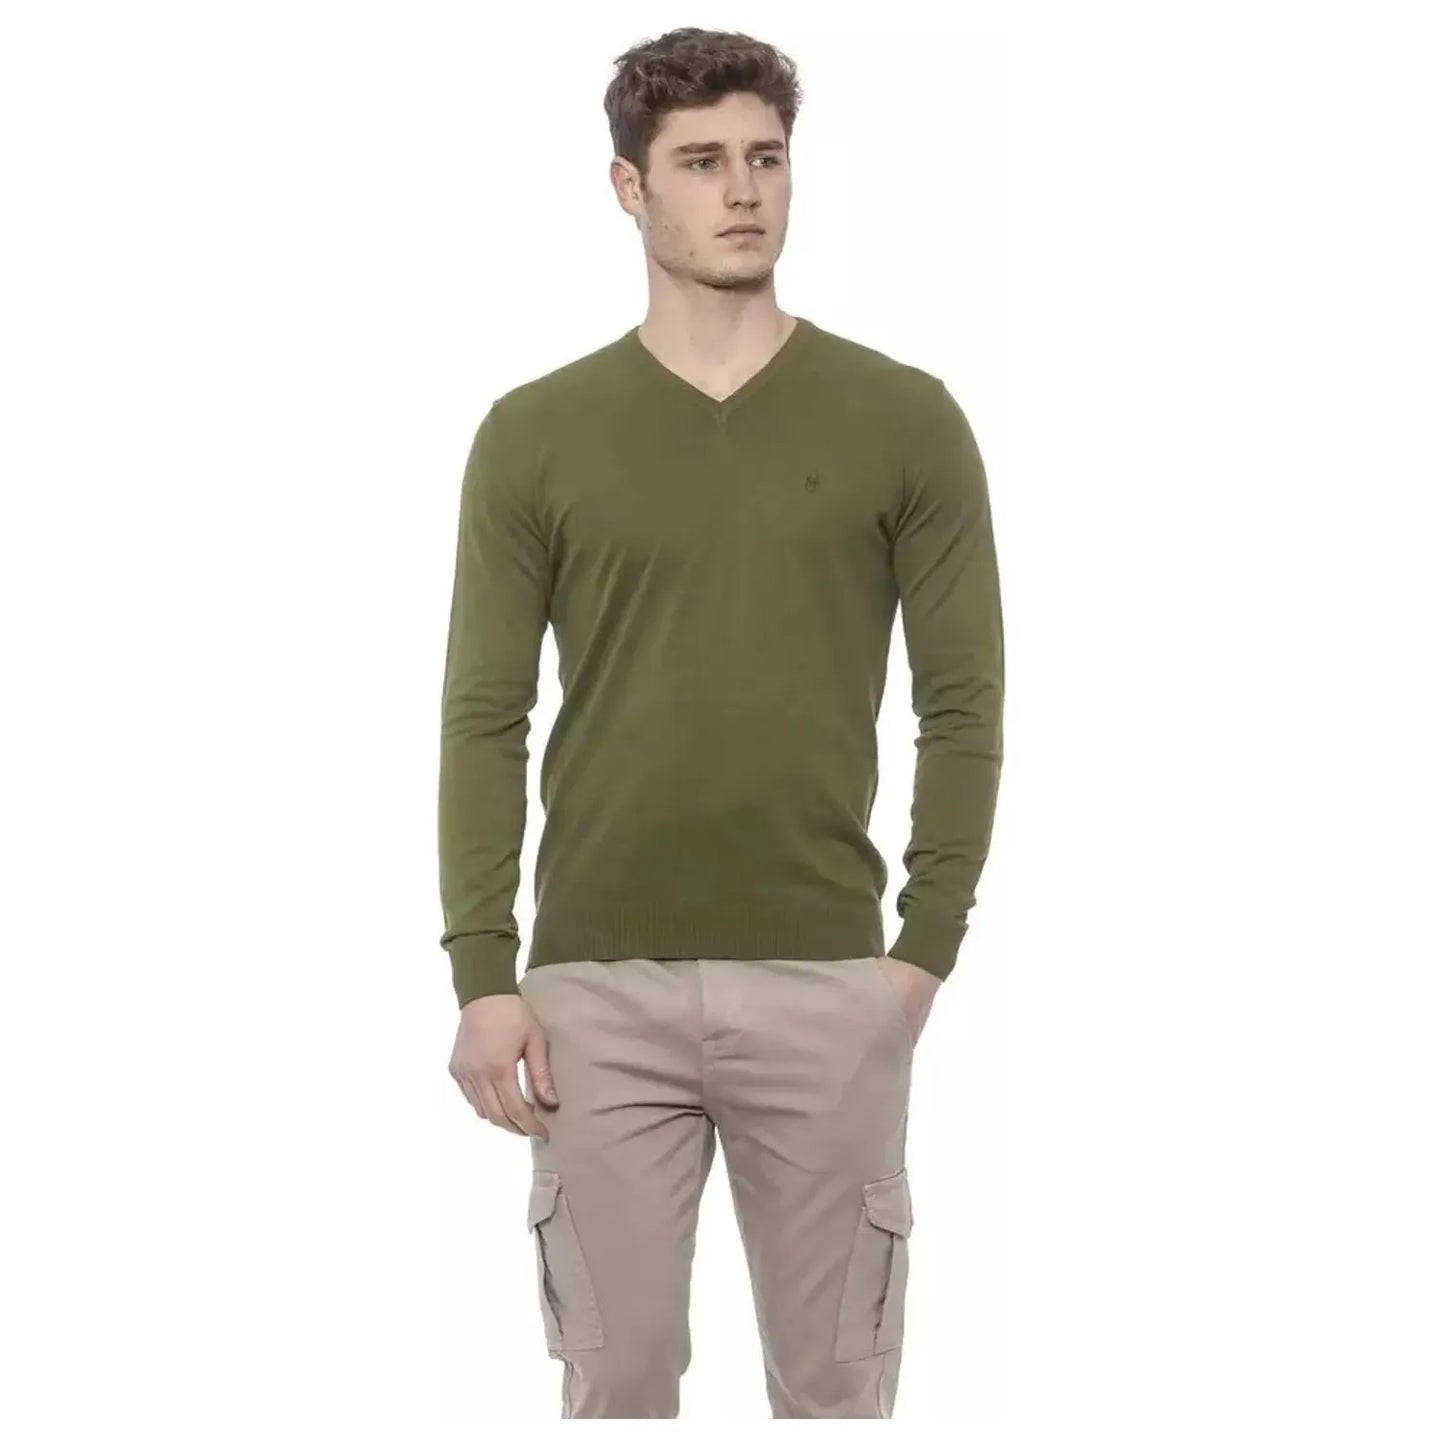 Conte of Florence Elegant V-Neck Green Cotton Sweater olivegreen-sweater stock_product_image_20336_290789765-26-40bba3ec-ff1.webp